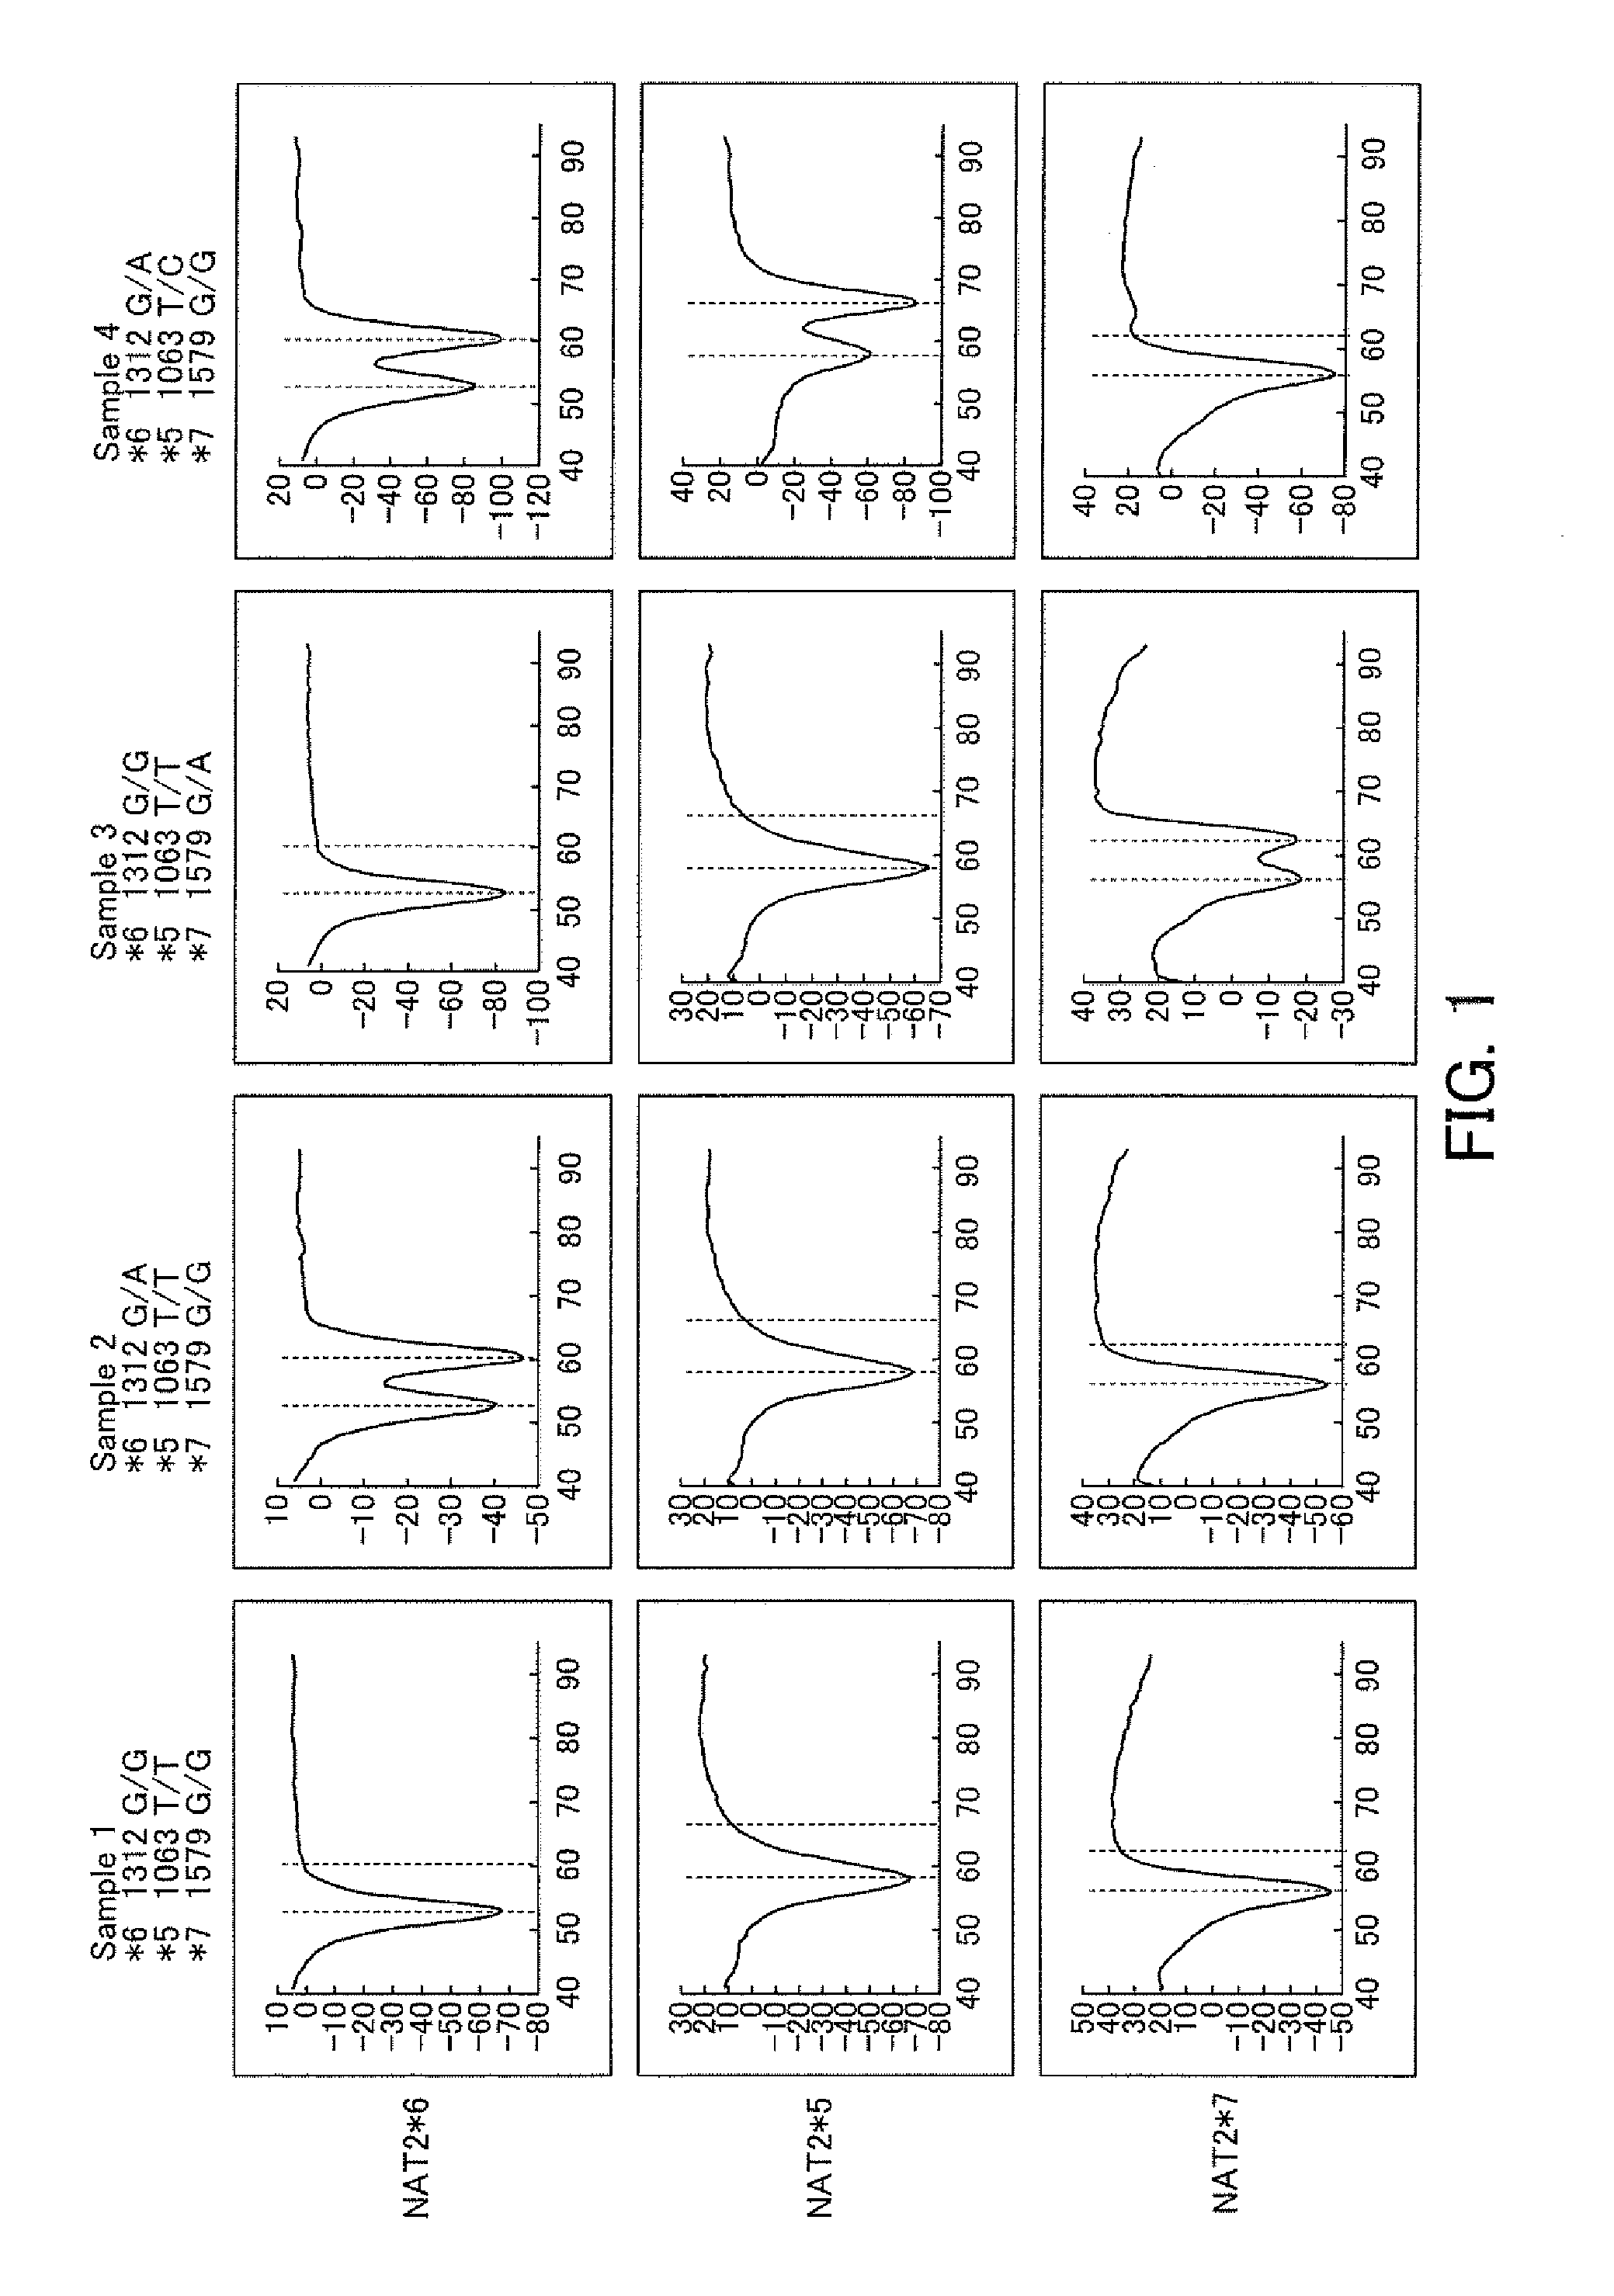 Probes for Detection of NAT2 Gene, Reagent Containing the Same, and The Uses Thereof